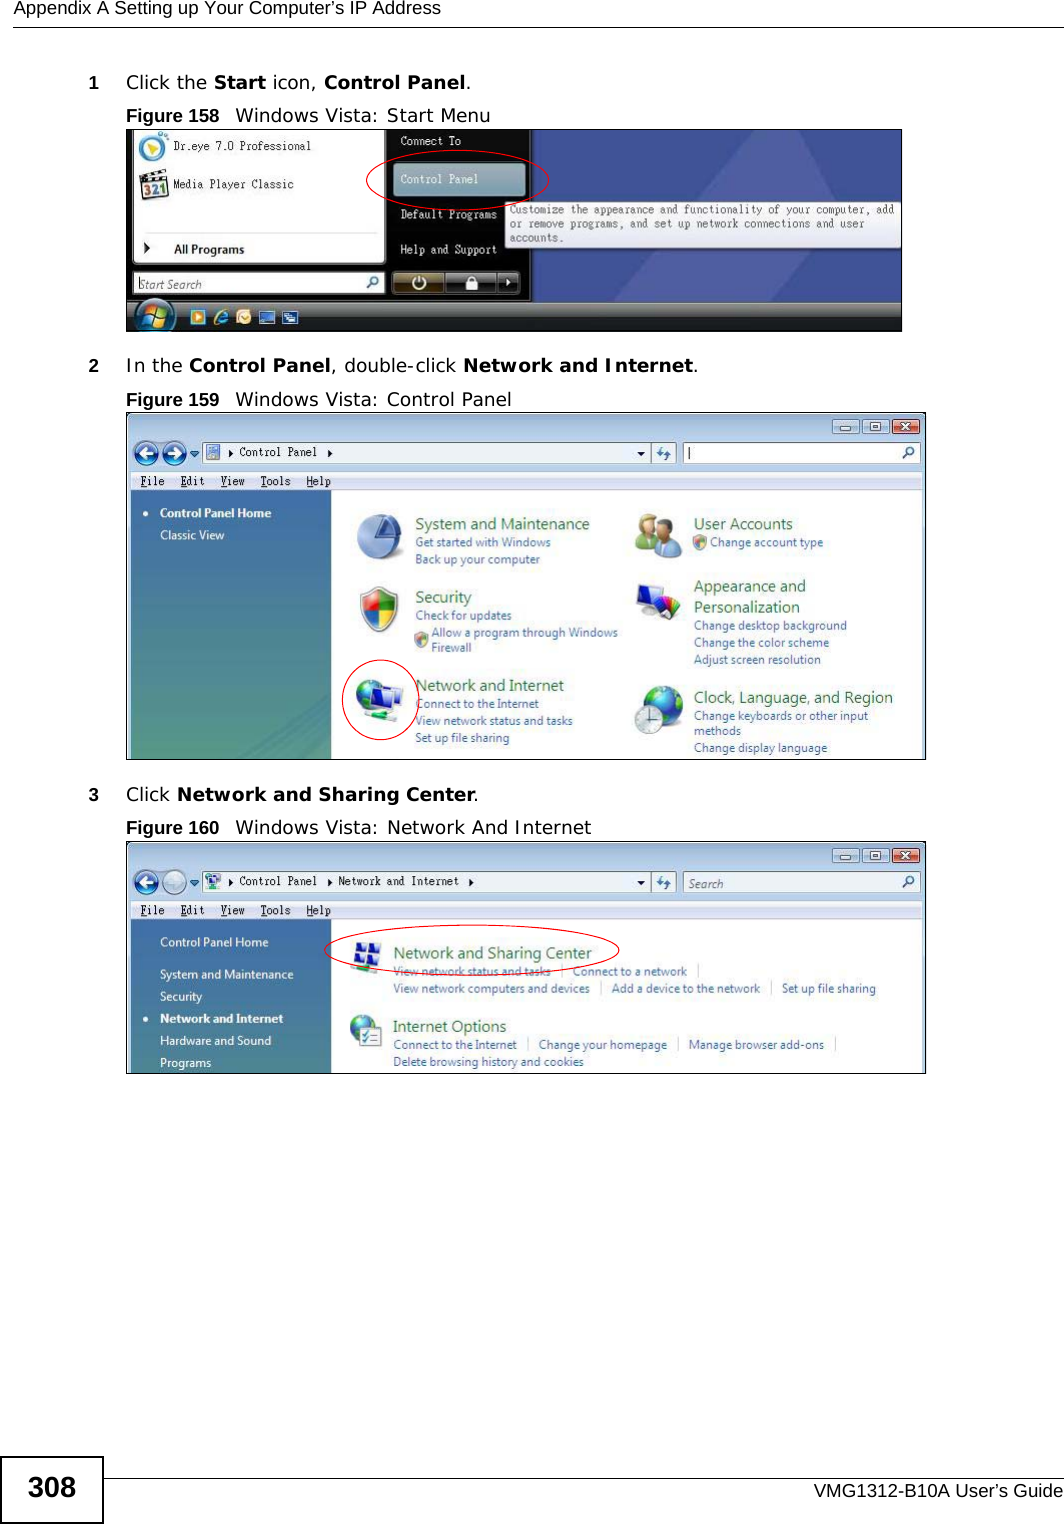 Appendix A Setting up Your Computer’s IP AddressVMG1312-B10A User’s Guide3081Click the Start icon, Control Panel.Figure 158   Windows Vista: Start Menu2In the Control Panel, double-click Network and Internet.Figure 159   Windows Vista: Control Panel3Click Network and Sharing Center.Figure 160   Windows Vista: Network And Internet